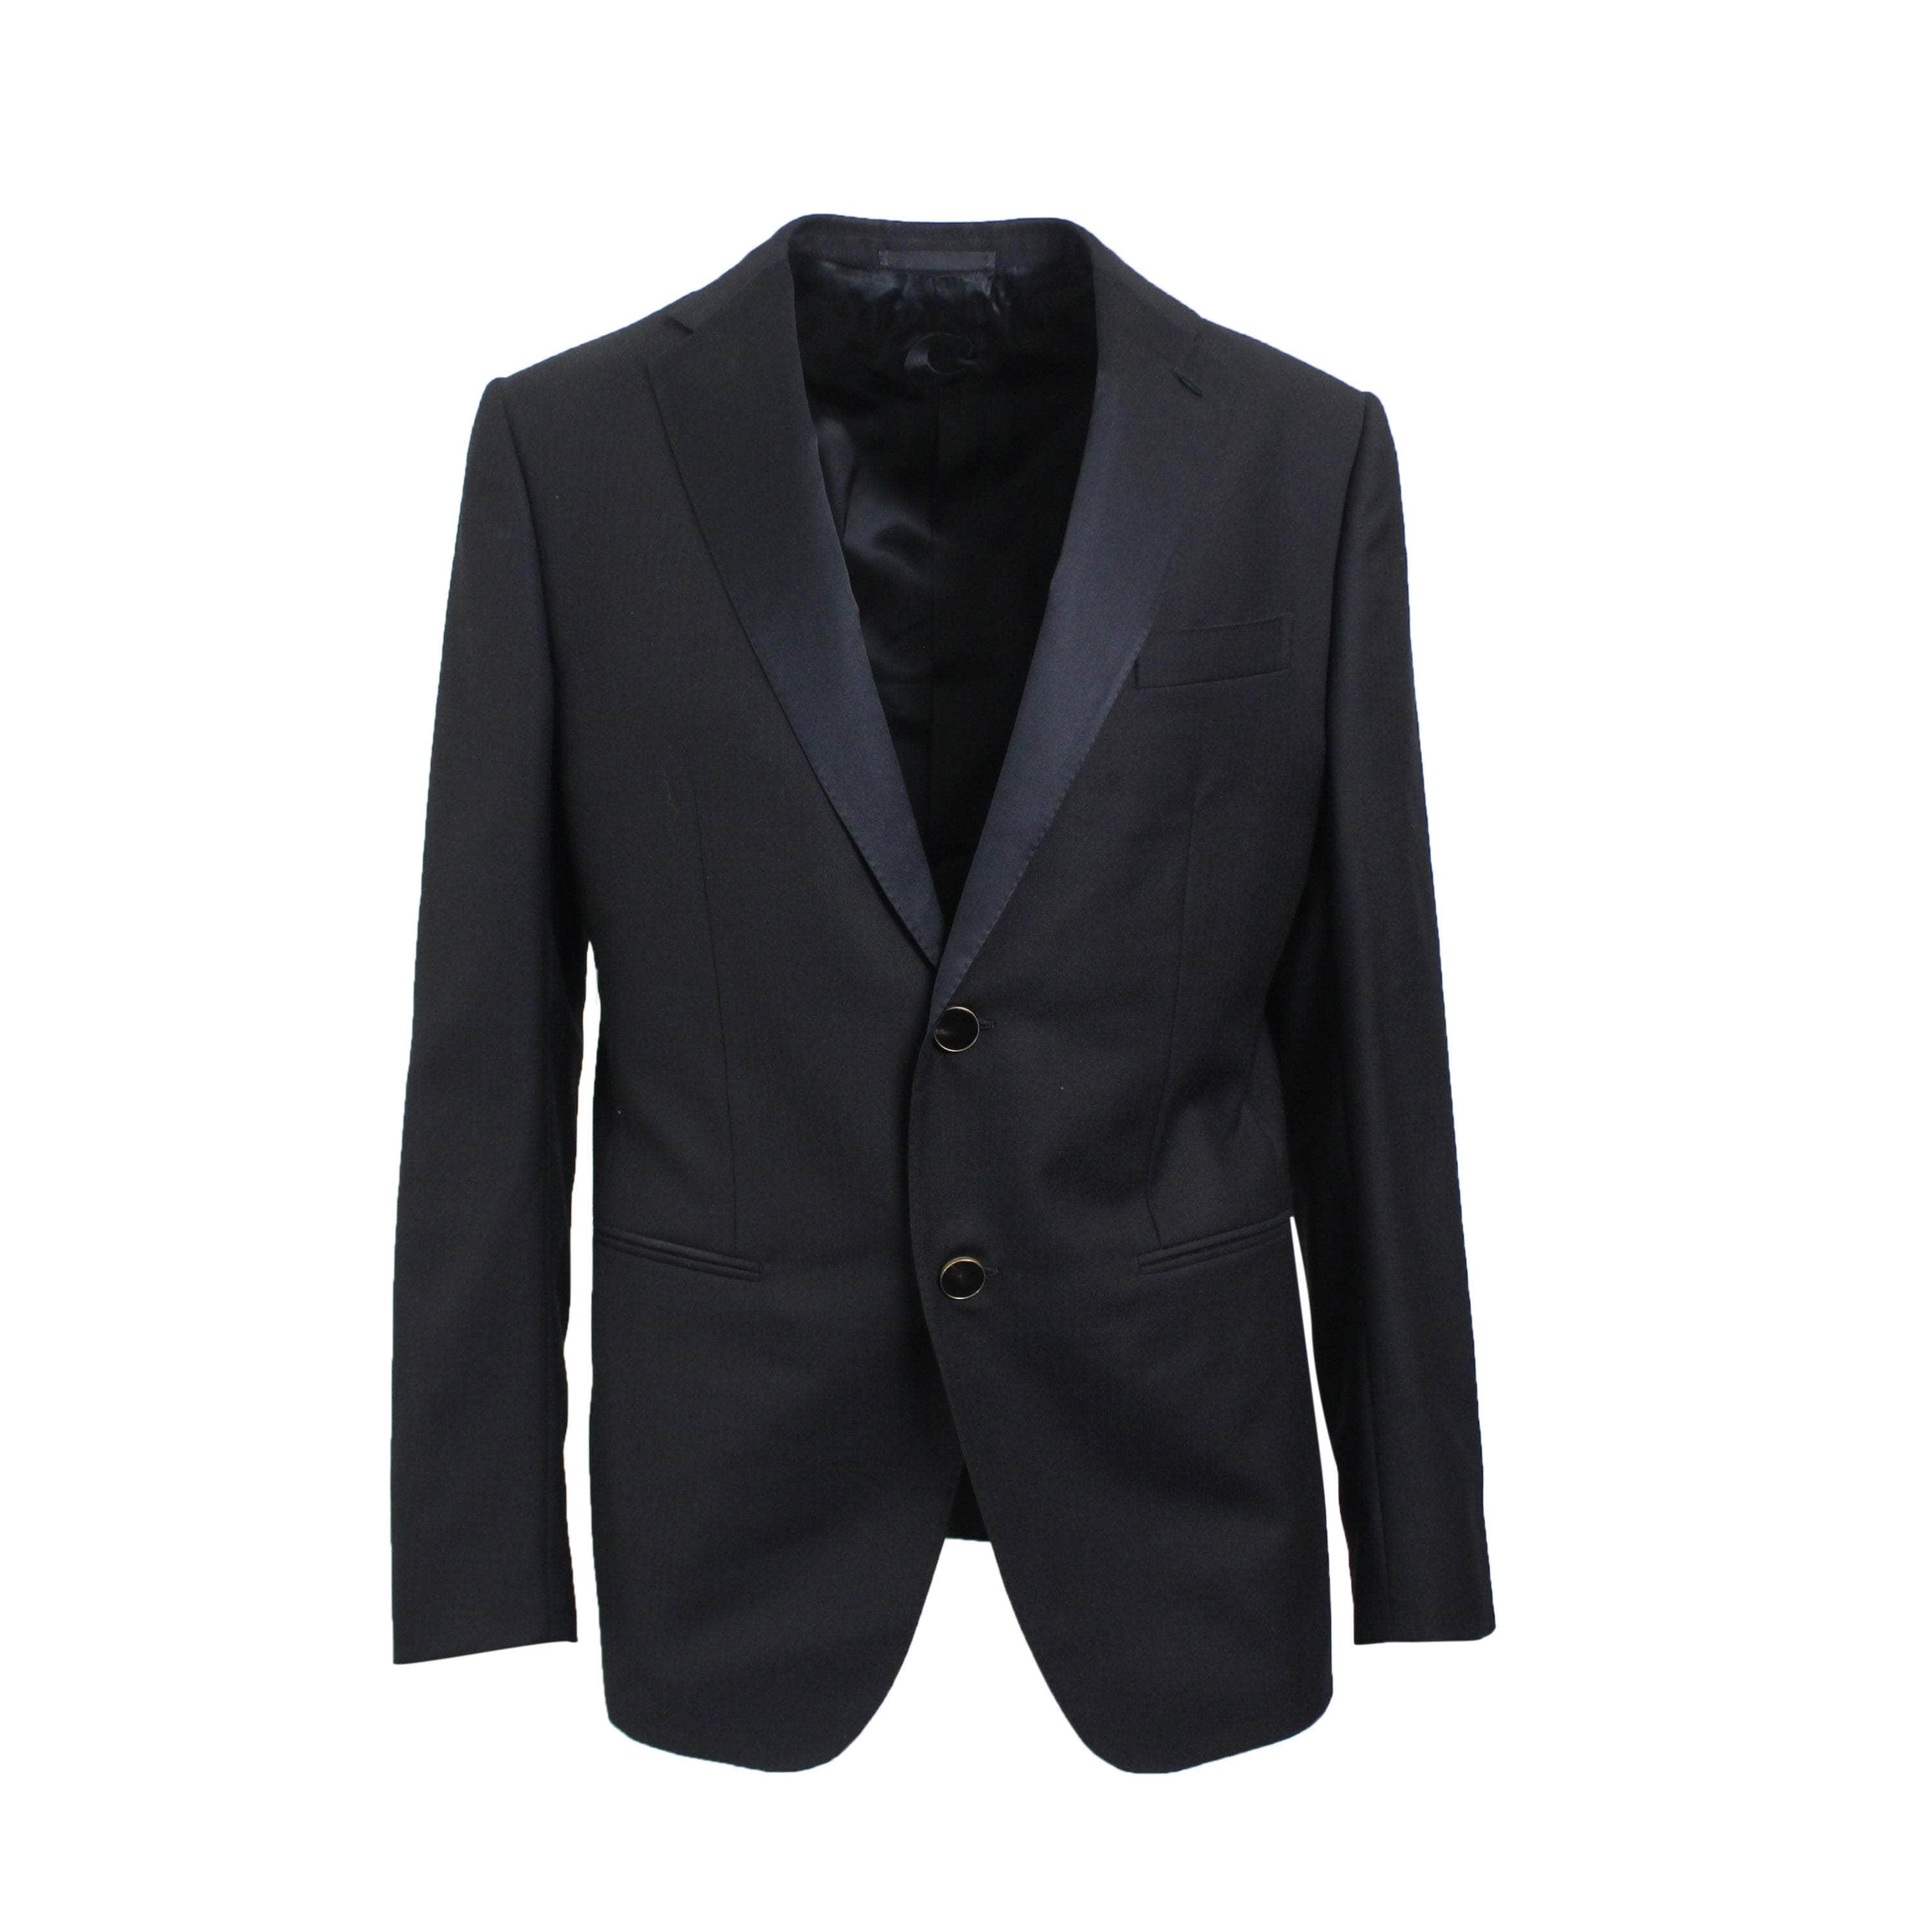 Caruso 500-750, caruso, channelenable-all, chicmi, couponcollection, main-clothing, shop375, size-50, Stadium Goods 50 Black Single Breasted Wool & Mohair 3 Piece Suit CRS-XTPS-0161/50 CRS-XTPS-0161/50